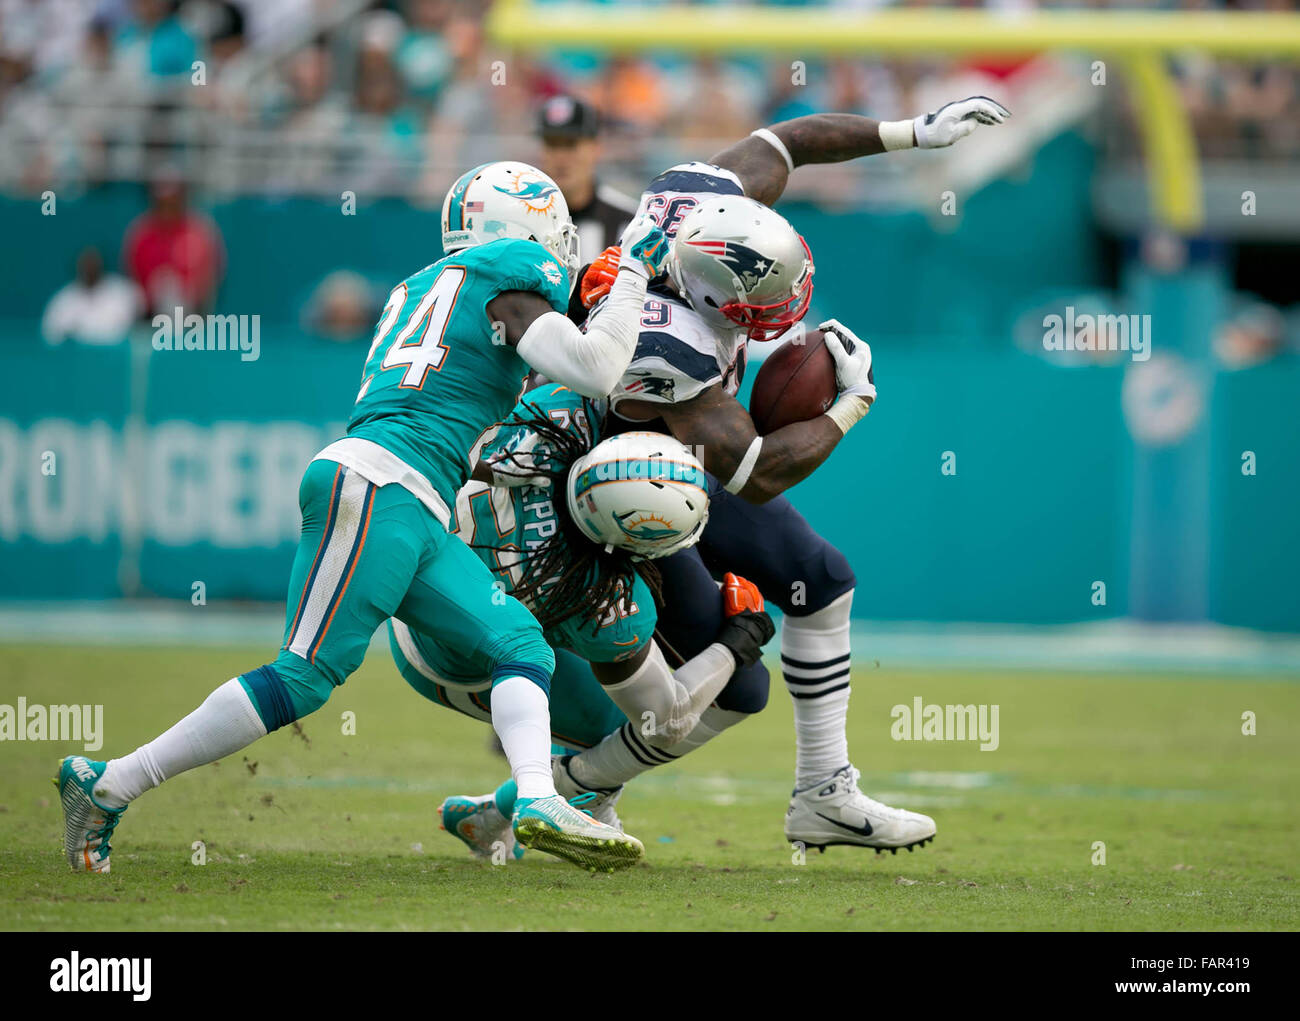 Miami Gardens, Florida, USA. 3rd Jan, 2016. Miami Dolphins cornerback Brice McCain (24) and Miami Dolphins middle linebacker Kelvin Sheppard (52) take down New England Patriots running back Steven Jackson (39) after a short gain at Sun Life Stadium in Miami Gardens, Florida on January 3, 2016. Credit:  Allen Eyestone/The Palm Beach Post/ZUMA Wire/Alamy Live News Stock Photo